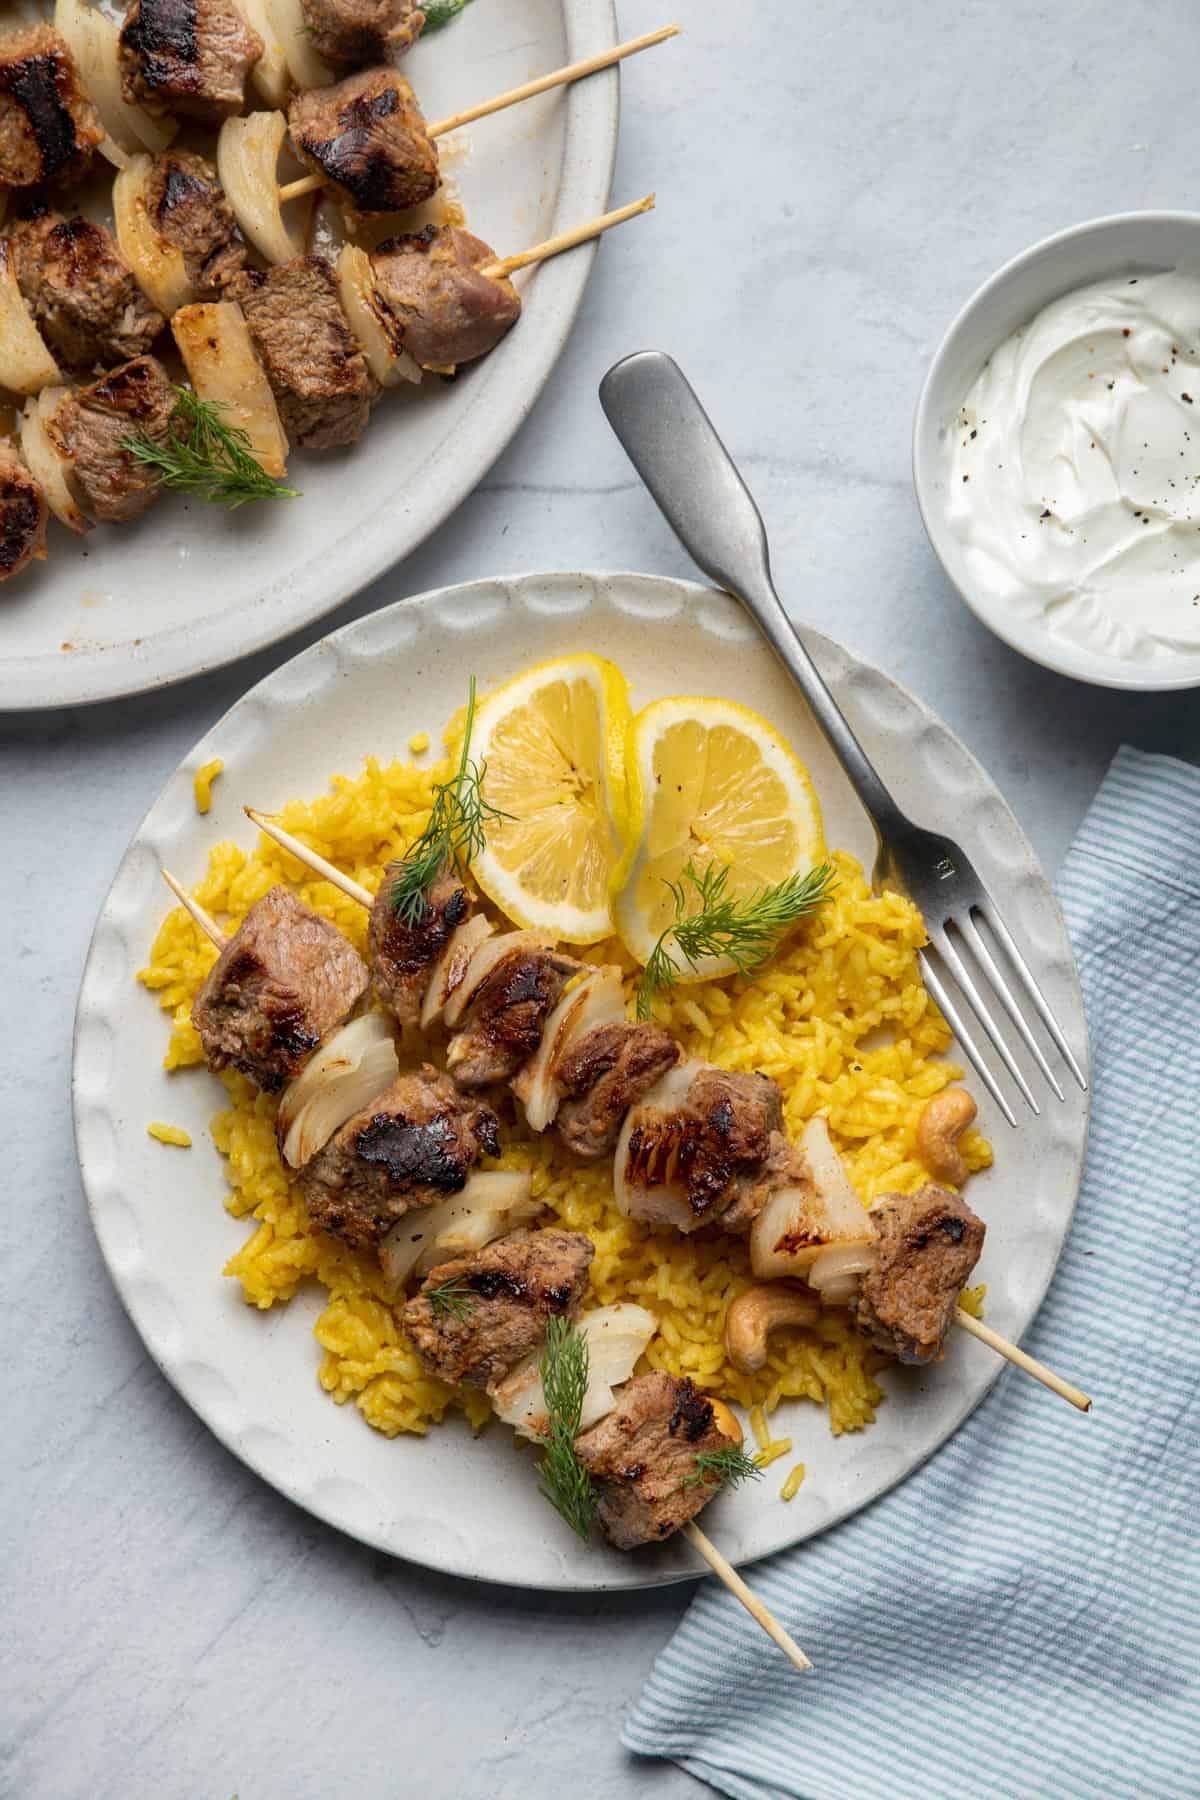 Plate of grilled lamb kabobs served over rice